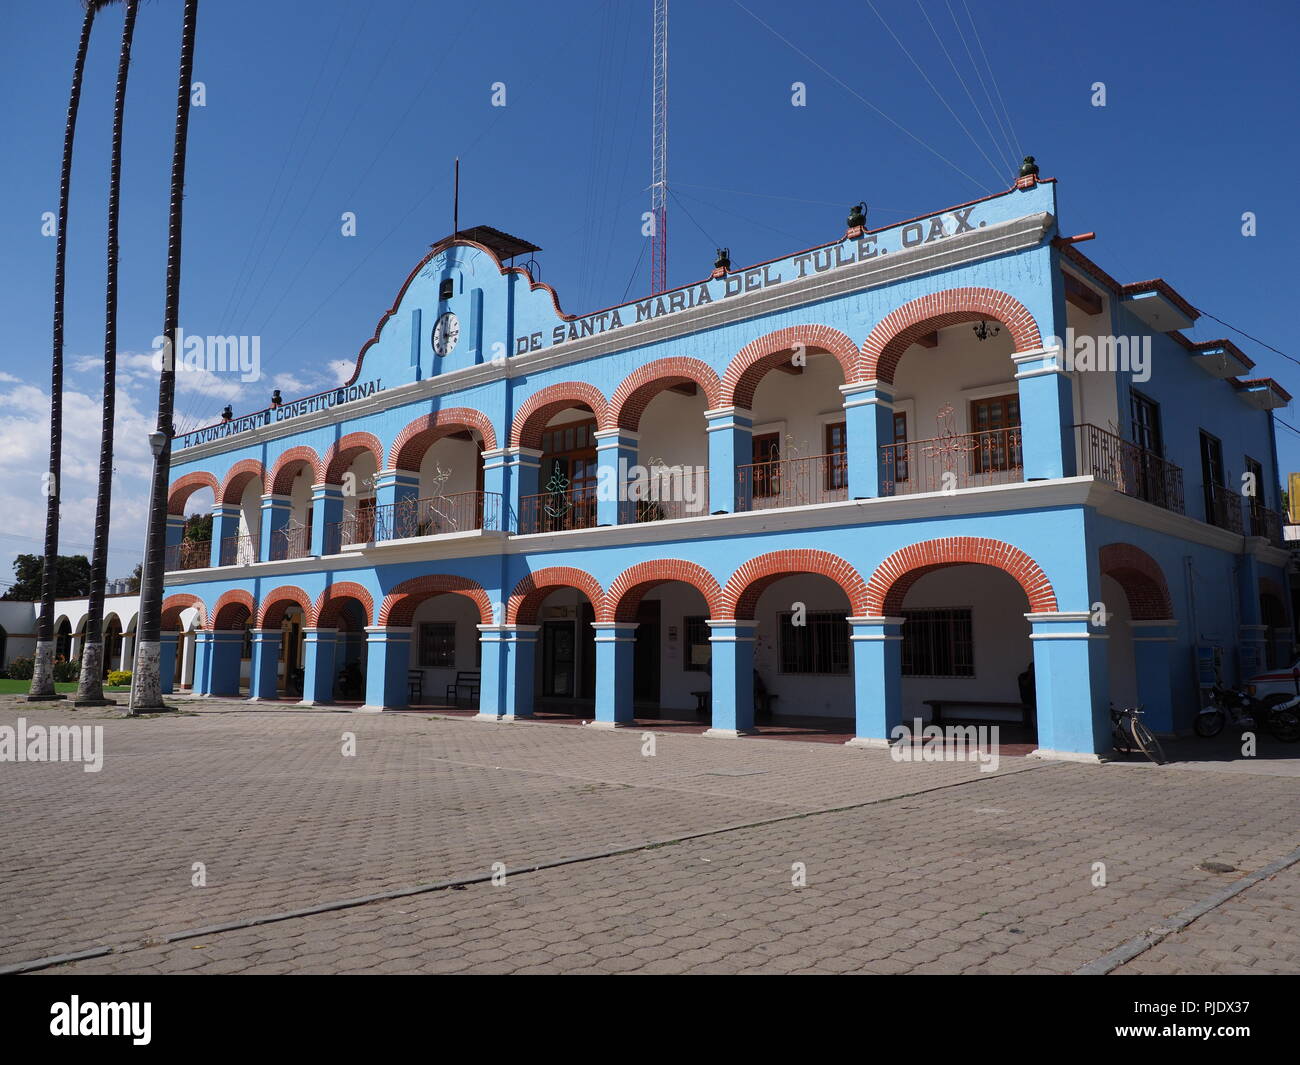 SANTA MARIA del TULE, NORTH AMERICA MEXICO on FEBRUARY 2018: Elevation and side of town hall on main market square in mexican city center at Oaxaca st Stock Photo